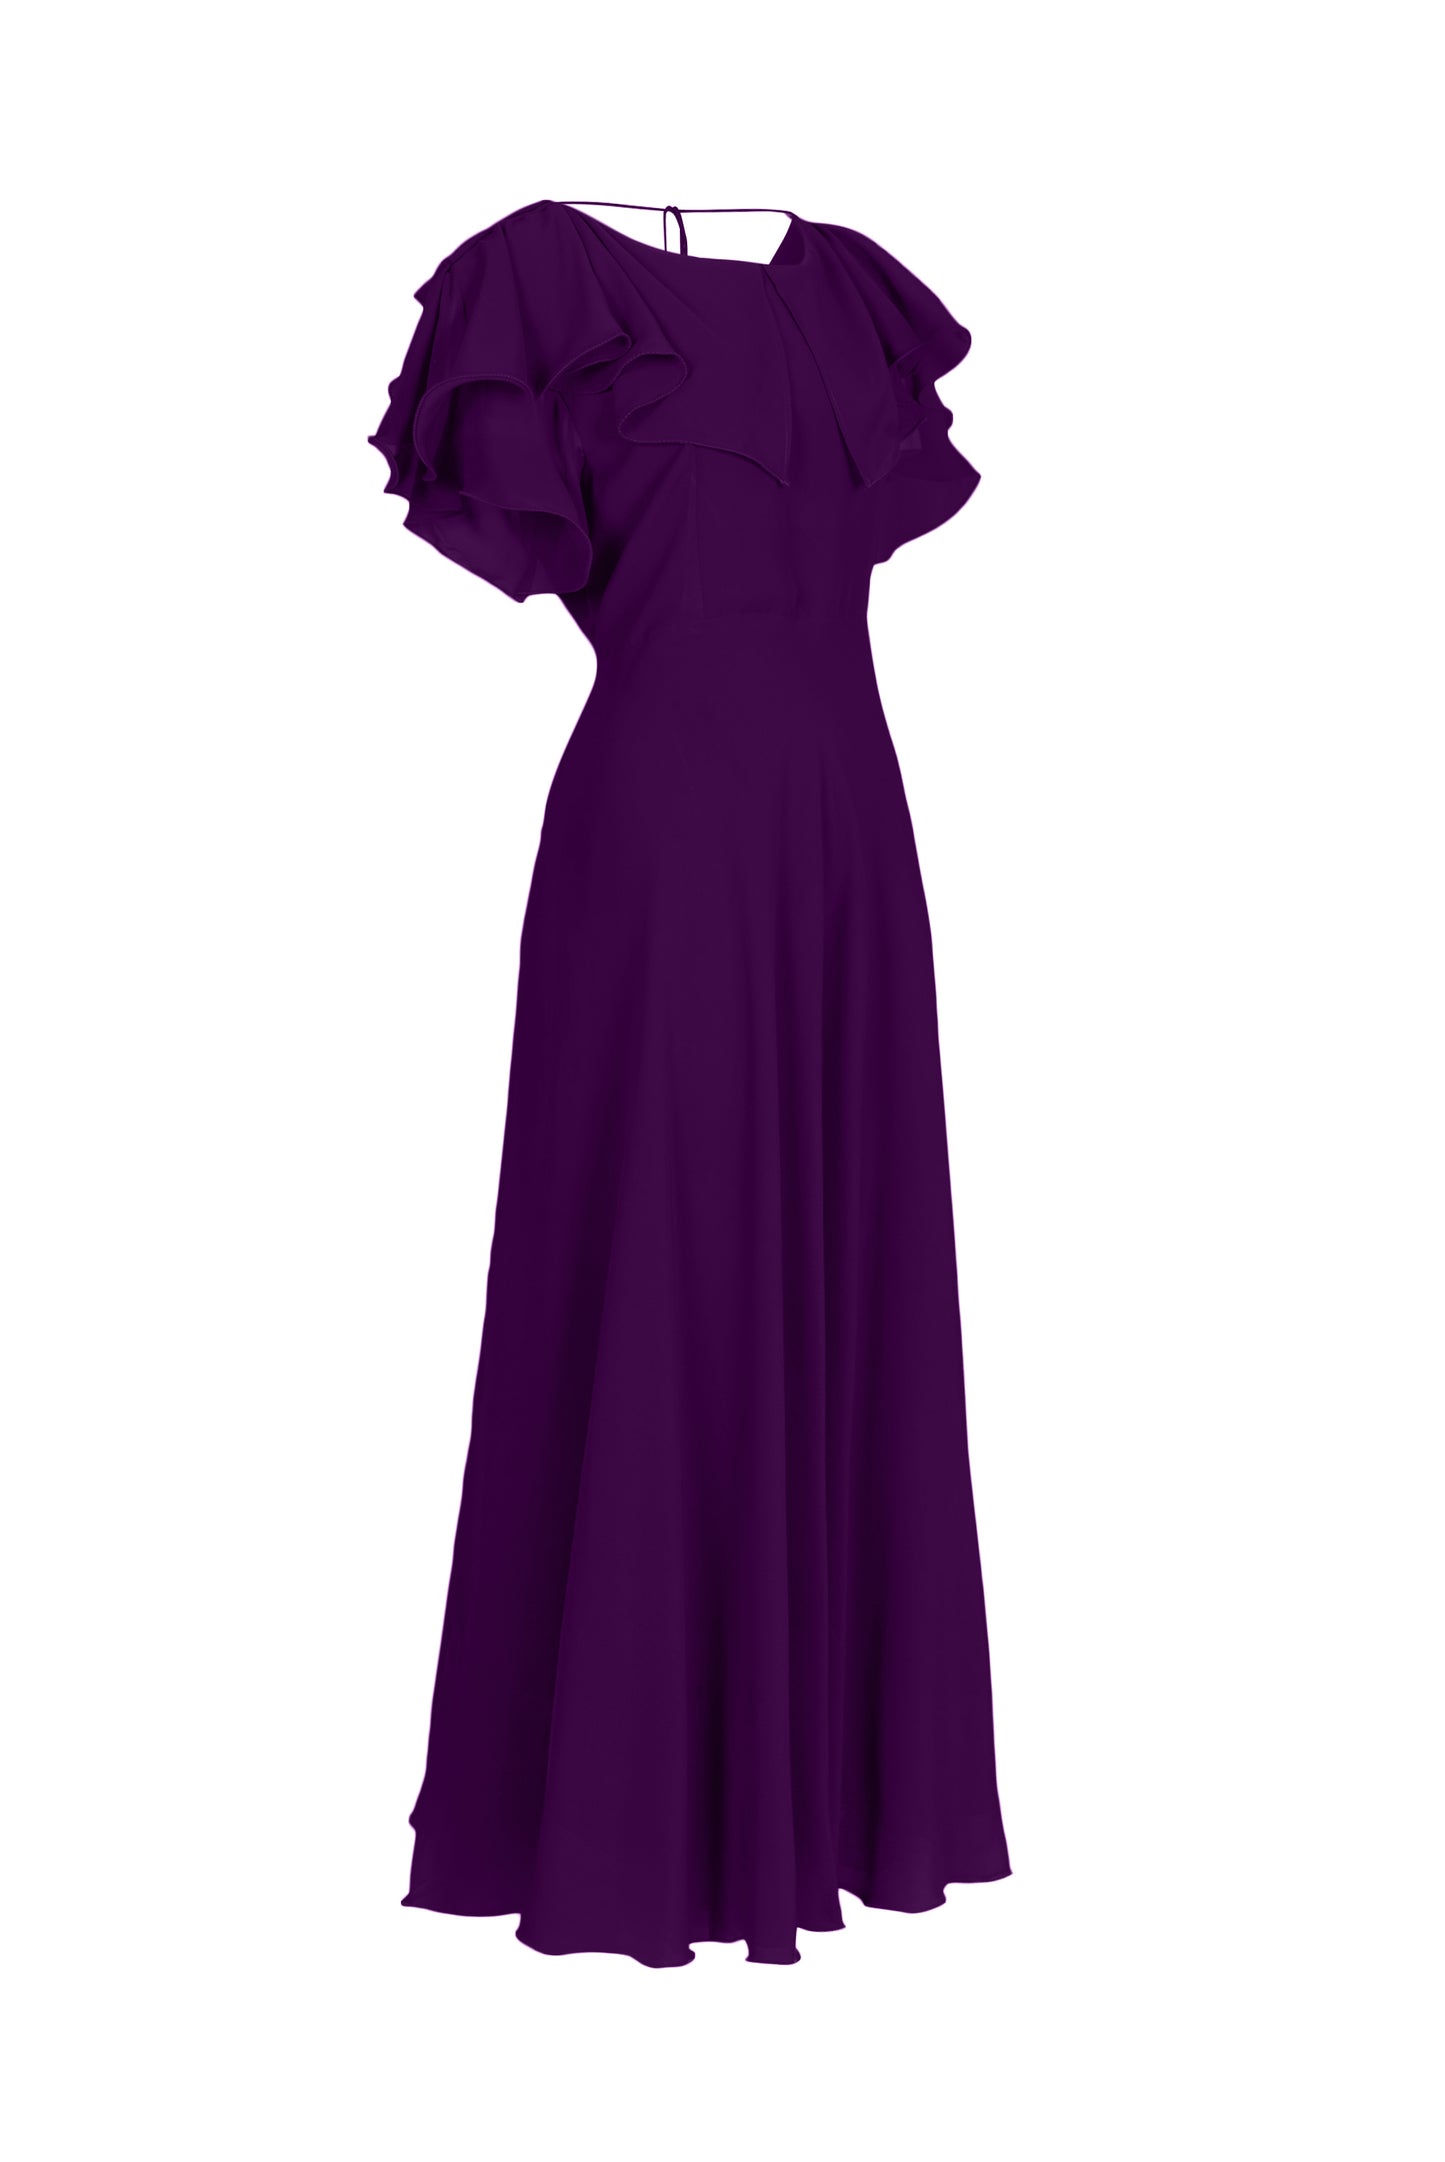 ZIA041 Violet Flared Georgette Gown.